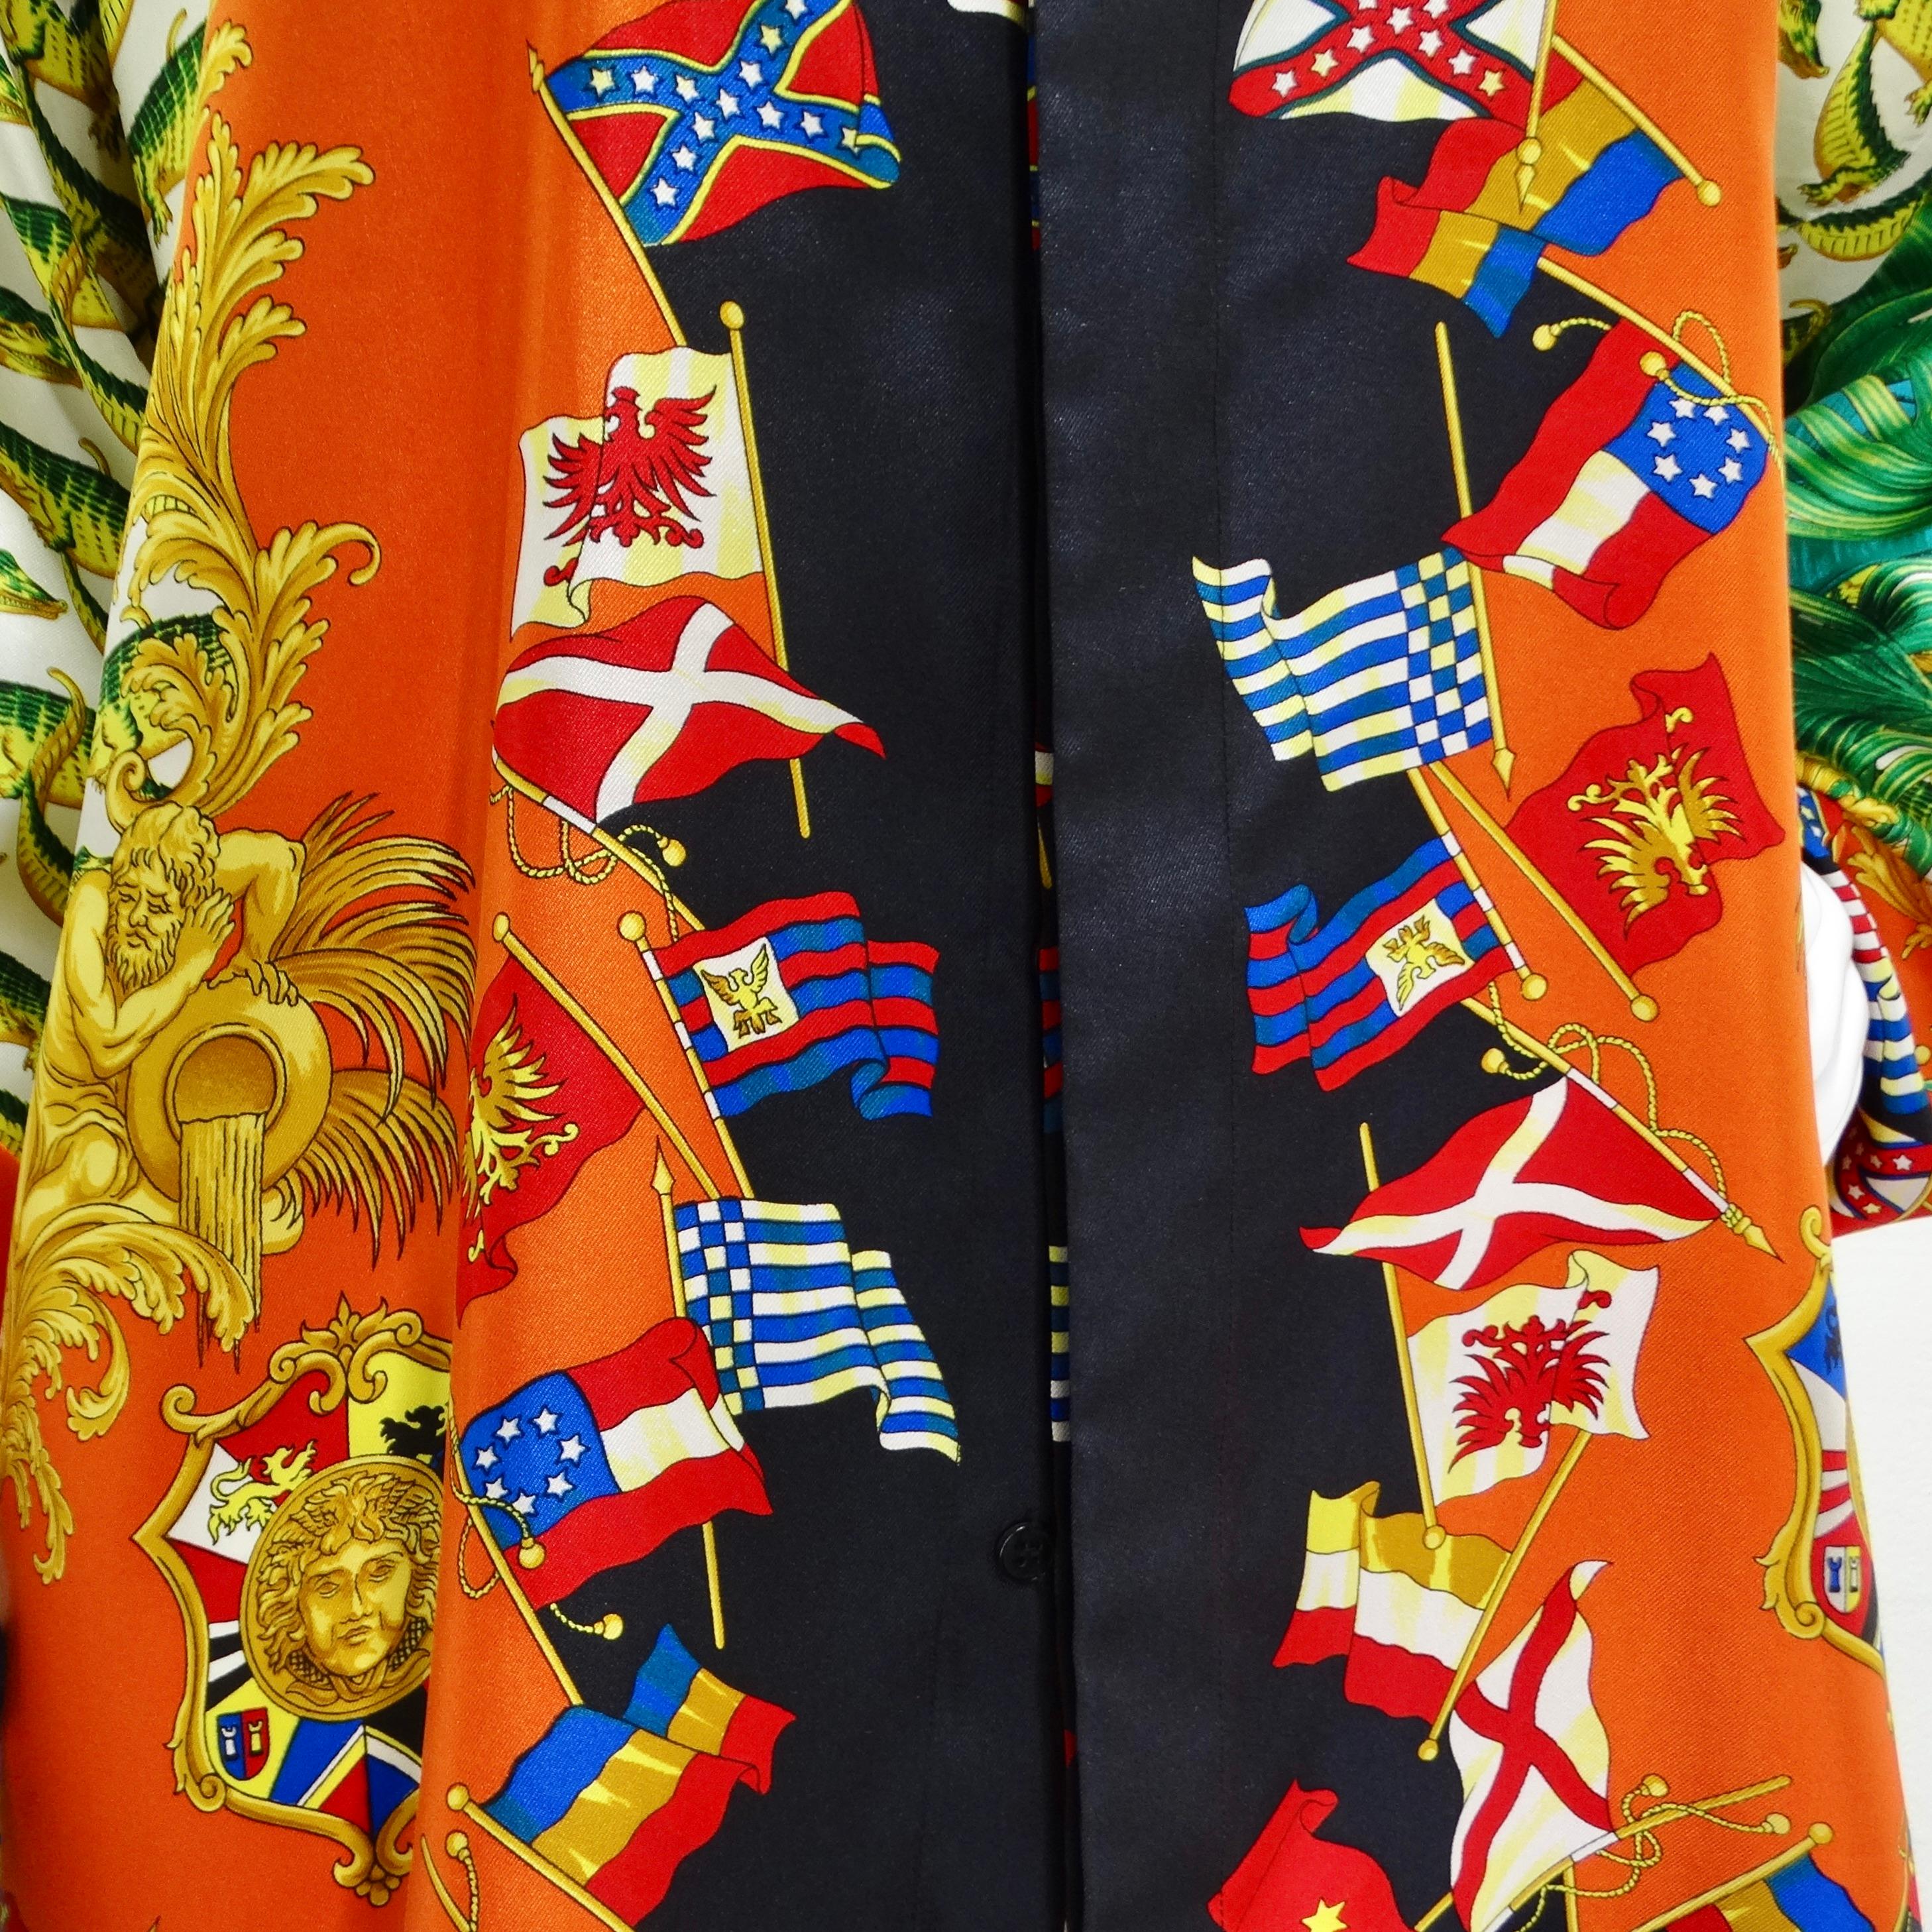 Gianna Versace SS 1993 Miami Collection Silk Shirt In Excellent Condition For Sale In Scottsdale, AZ